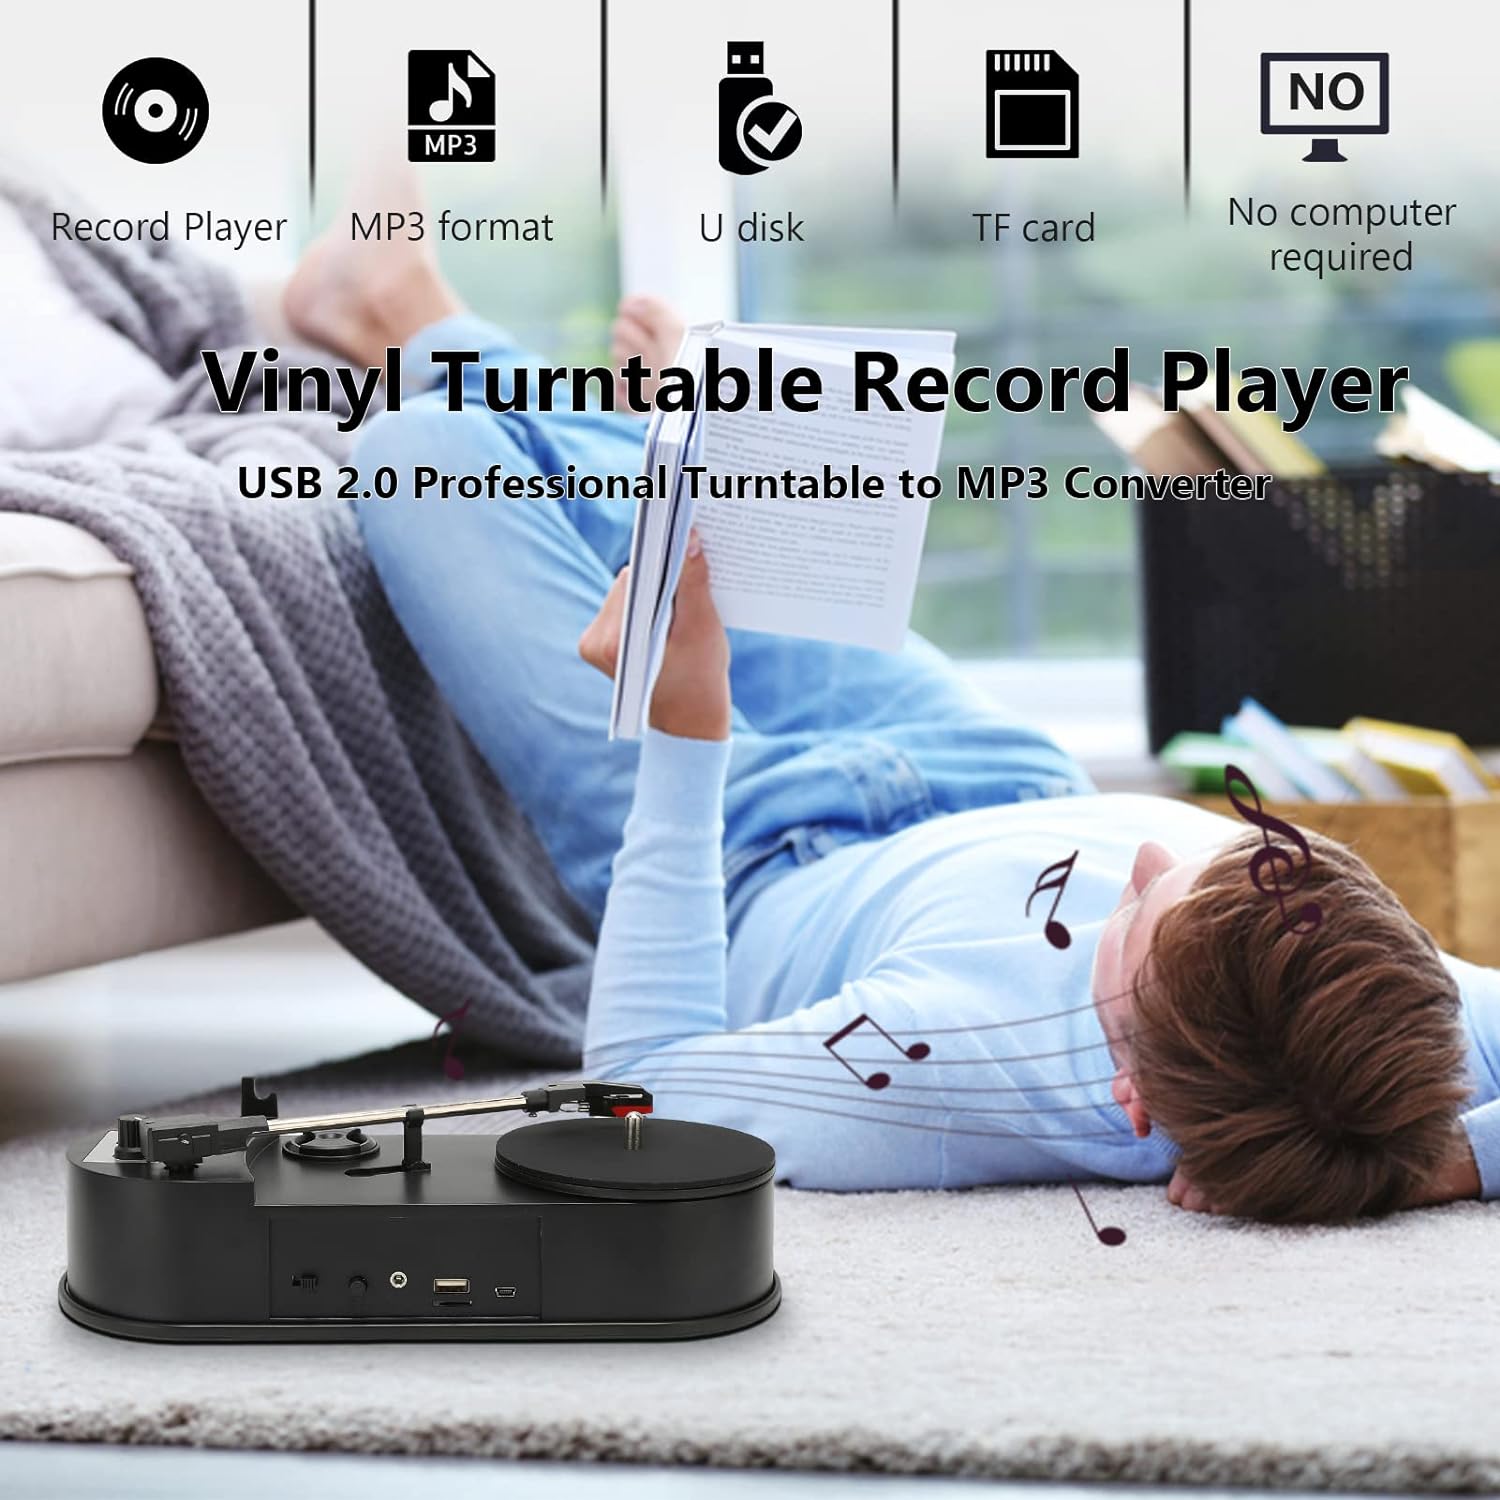 Great Choice Products Lp Vinyl To Mp3 Converter, Usb 2.0 Professional Lp Vinyl Turntable Record Player Turntable To Mp3 Converter, Convert Vinyl Re…